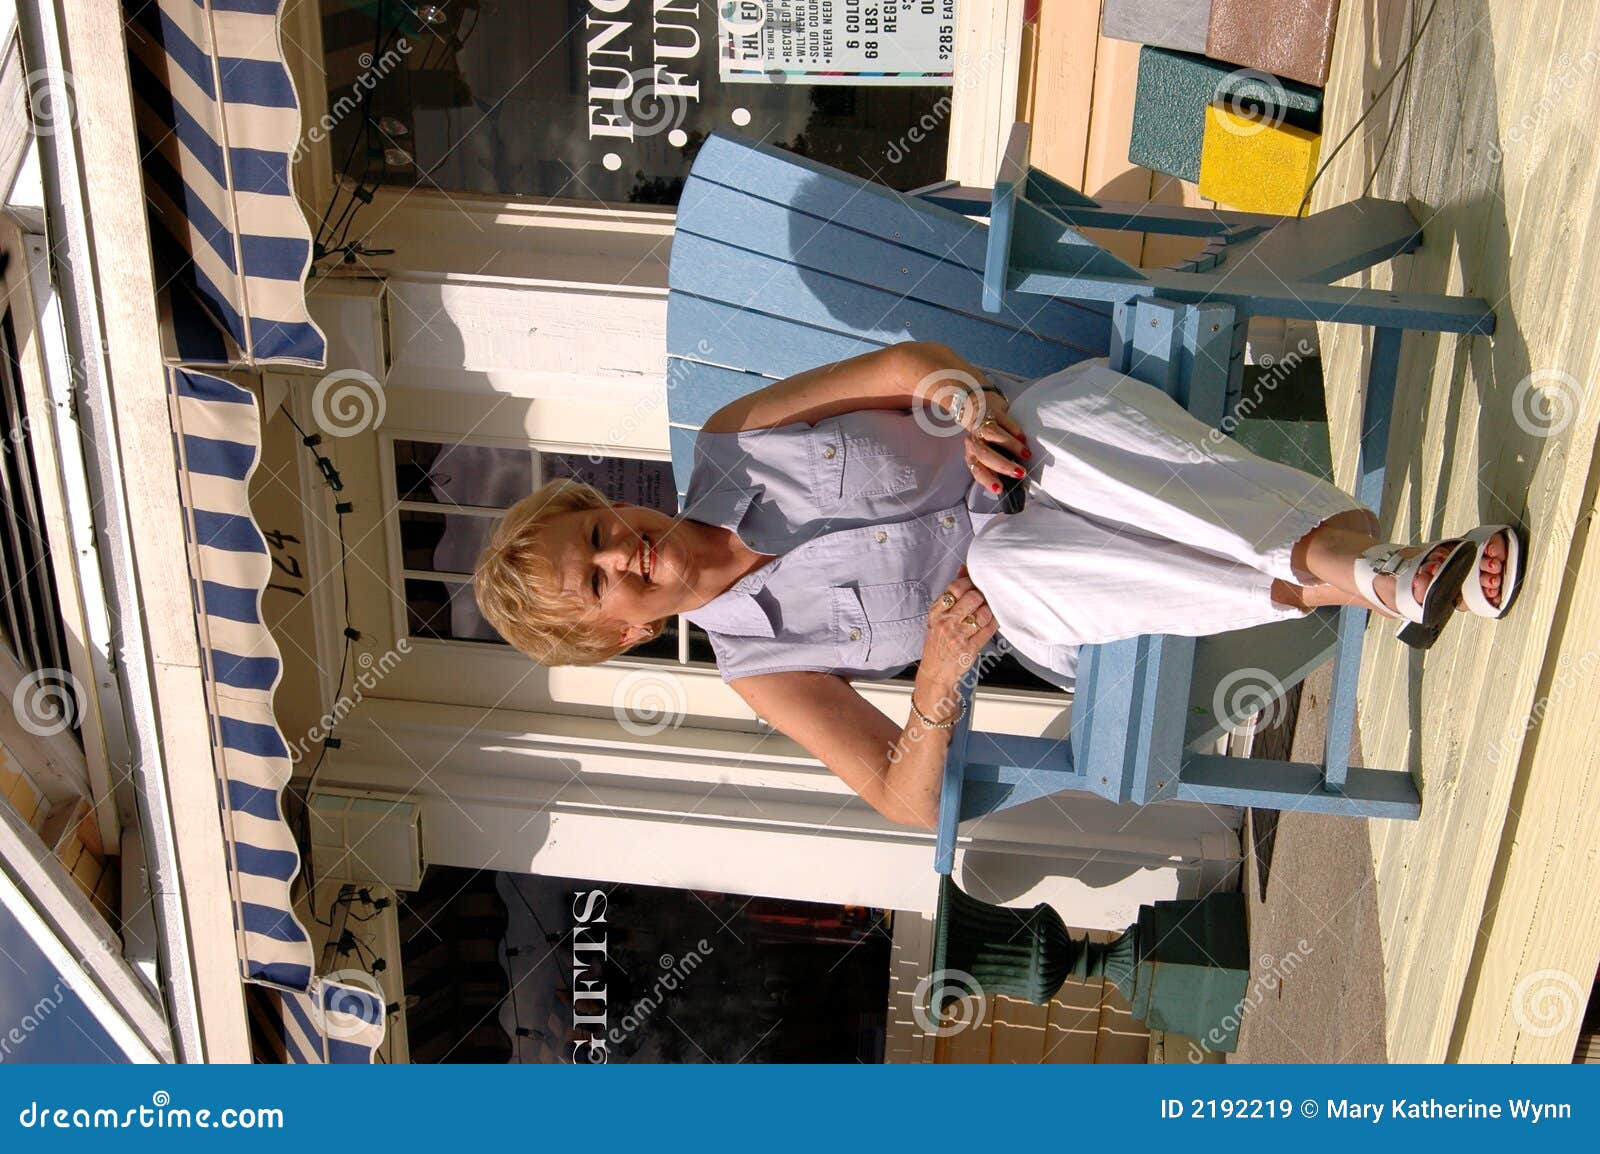 Gift shop owner stock image. Image of gift, small, smiles - 2192219